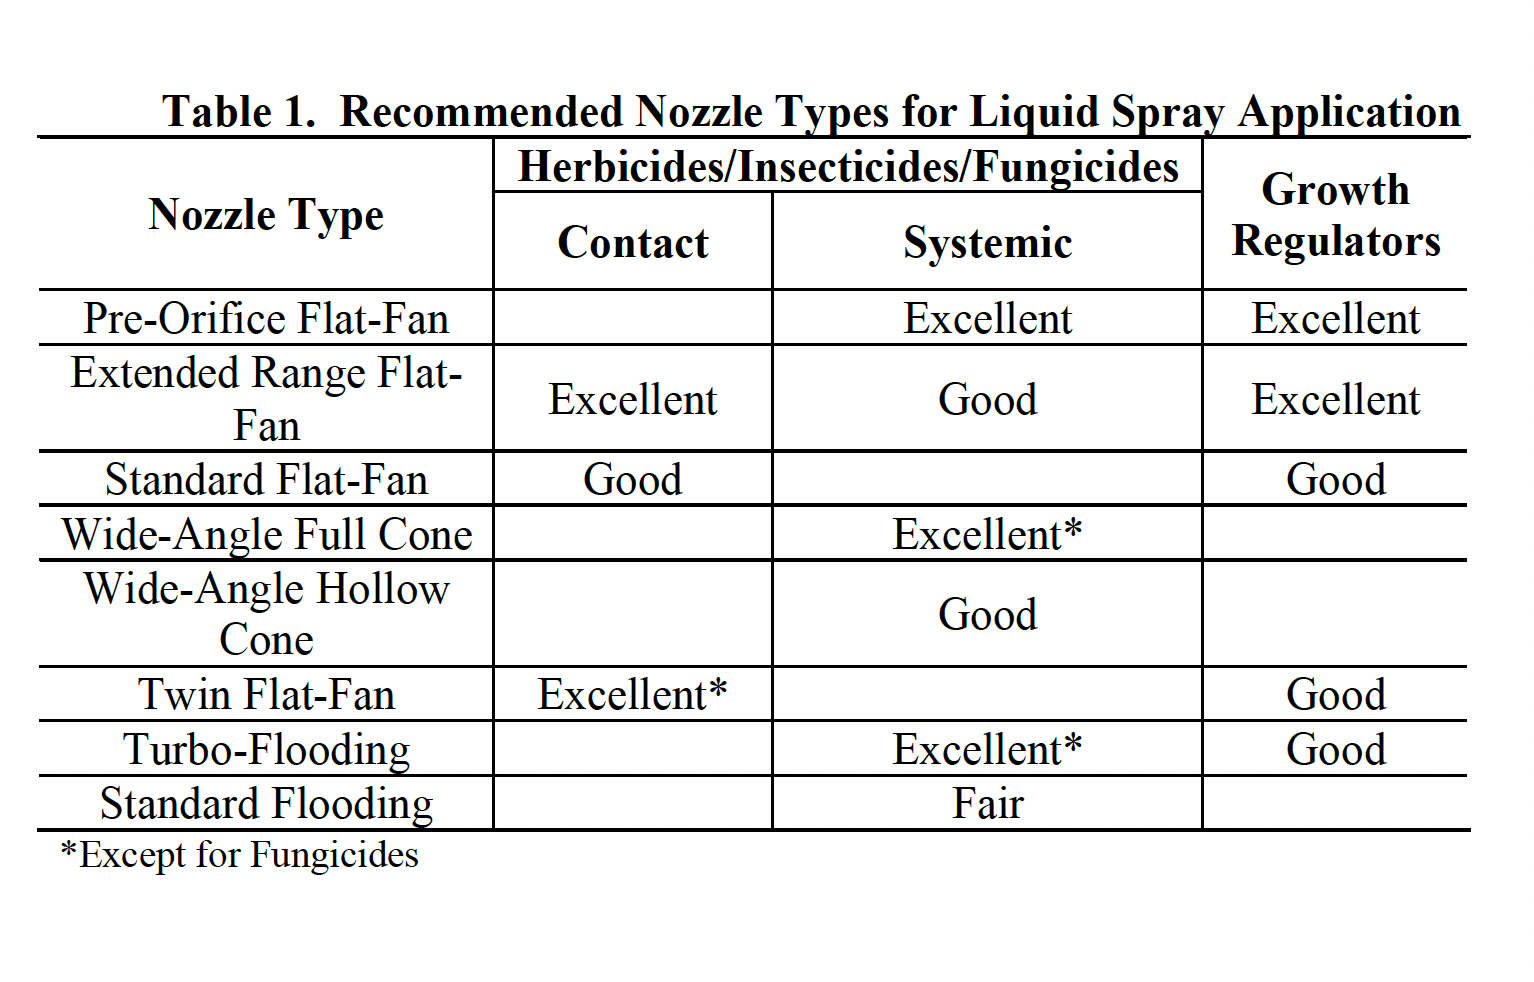 Table 1. Recommended Nozzle Types for Liquid Spray Application